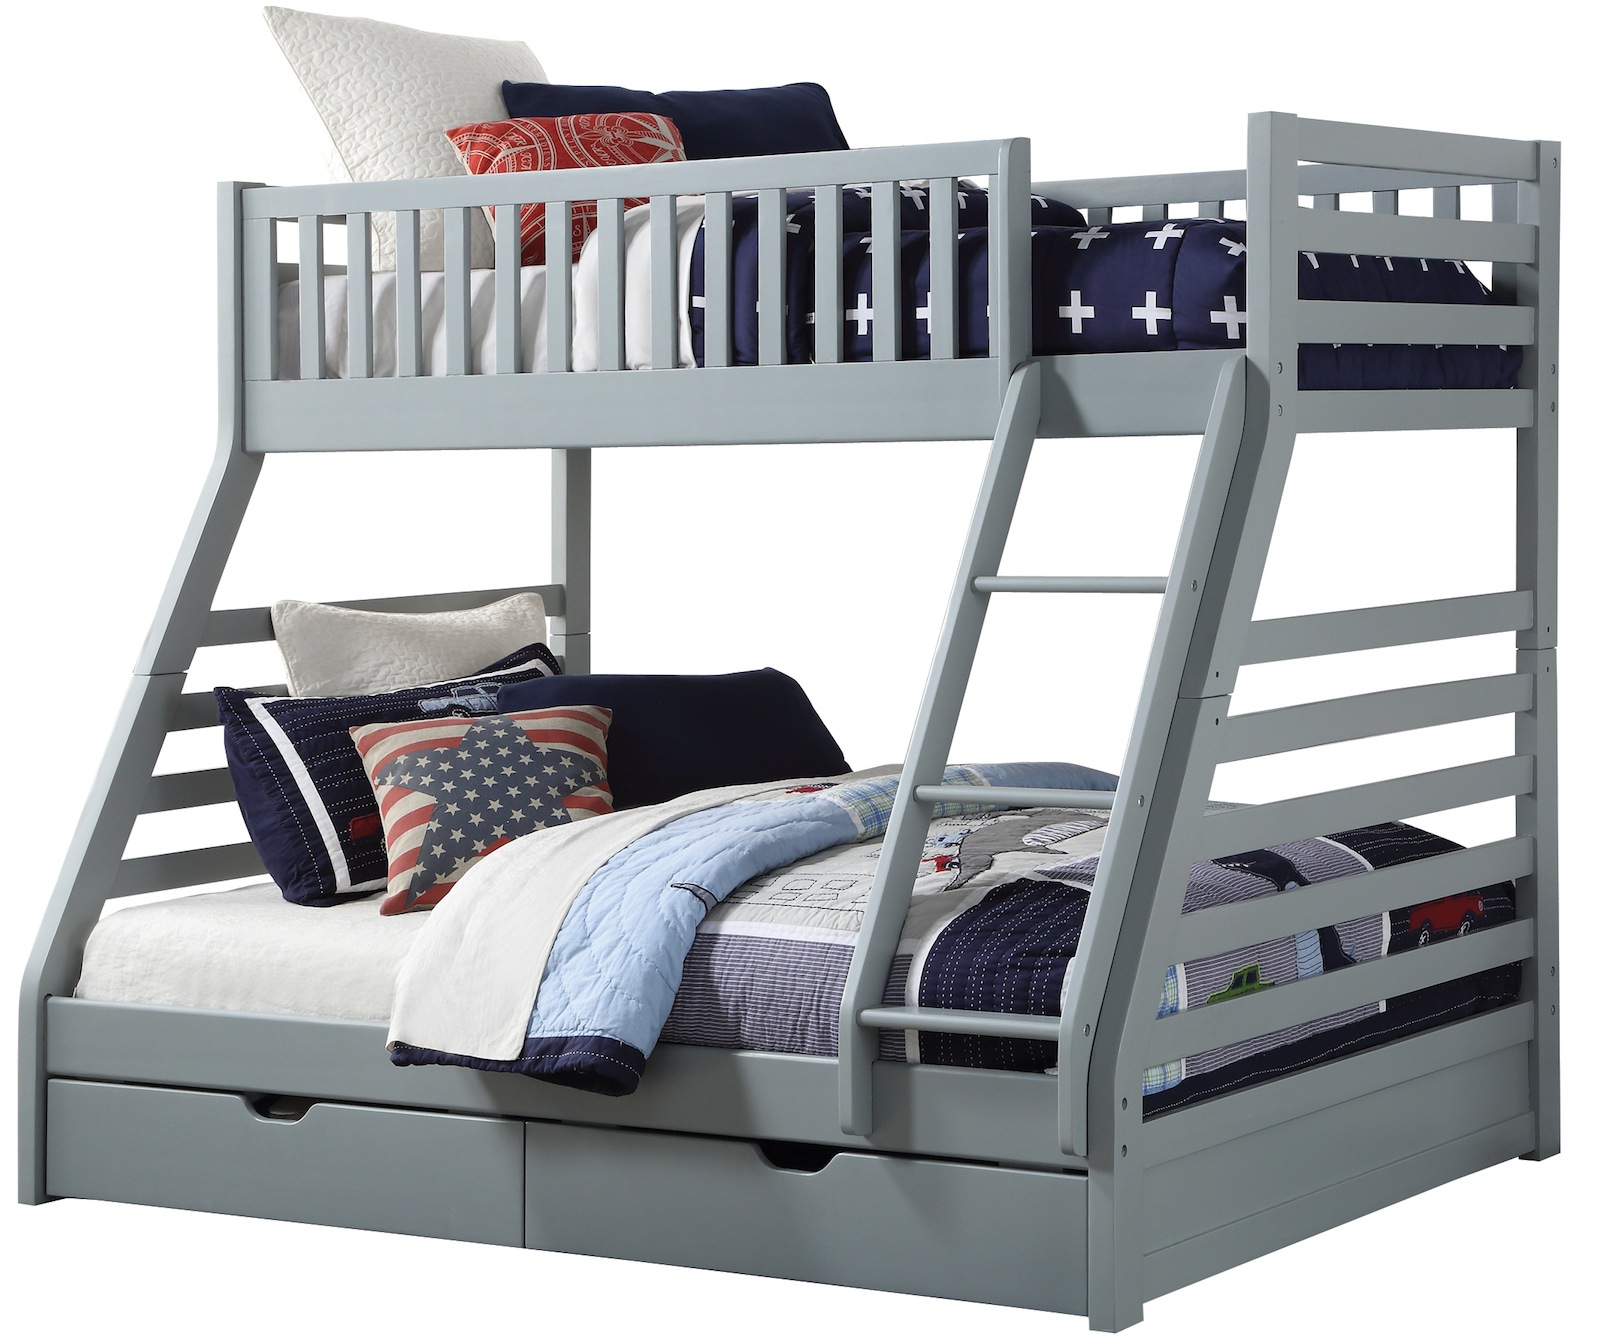 Sweet Dreams States Triple Sleeper Bunk, 3 Tier Bunk Beds With Mattresses